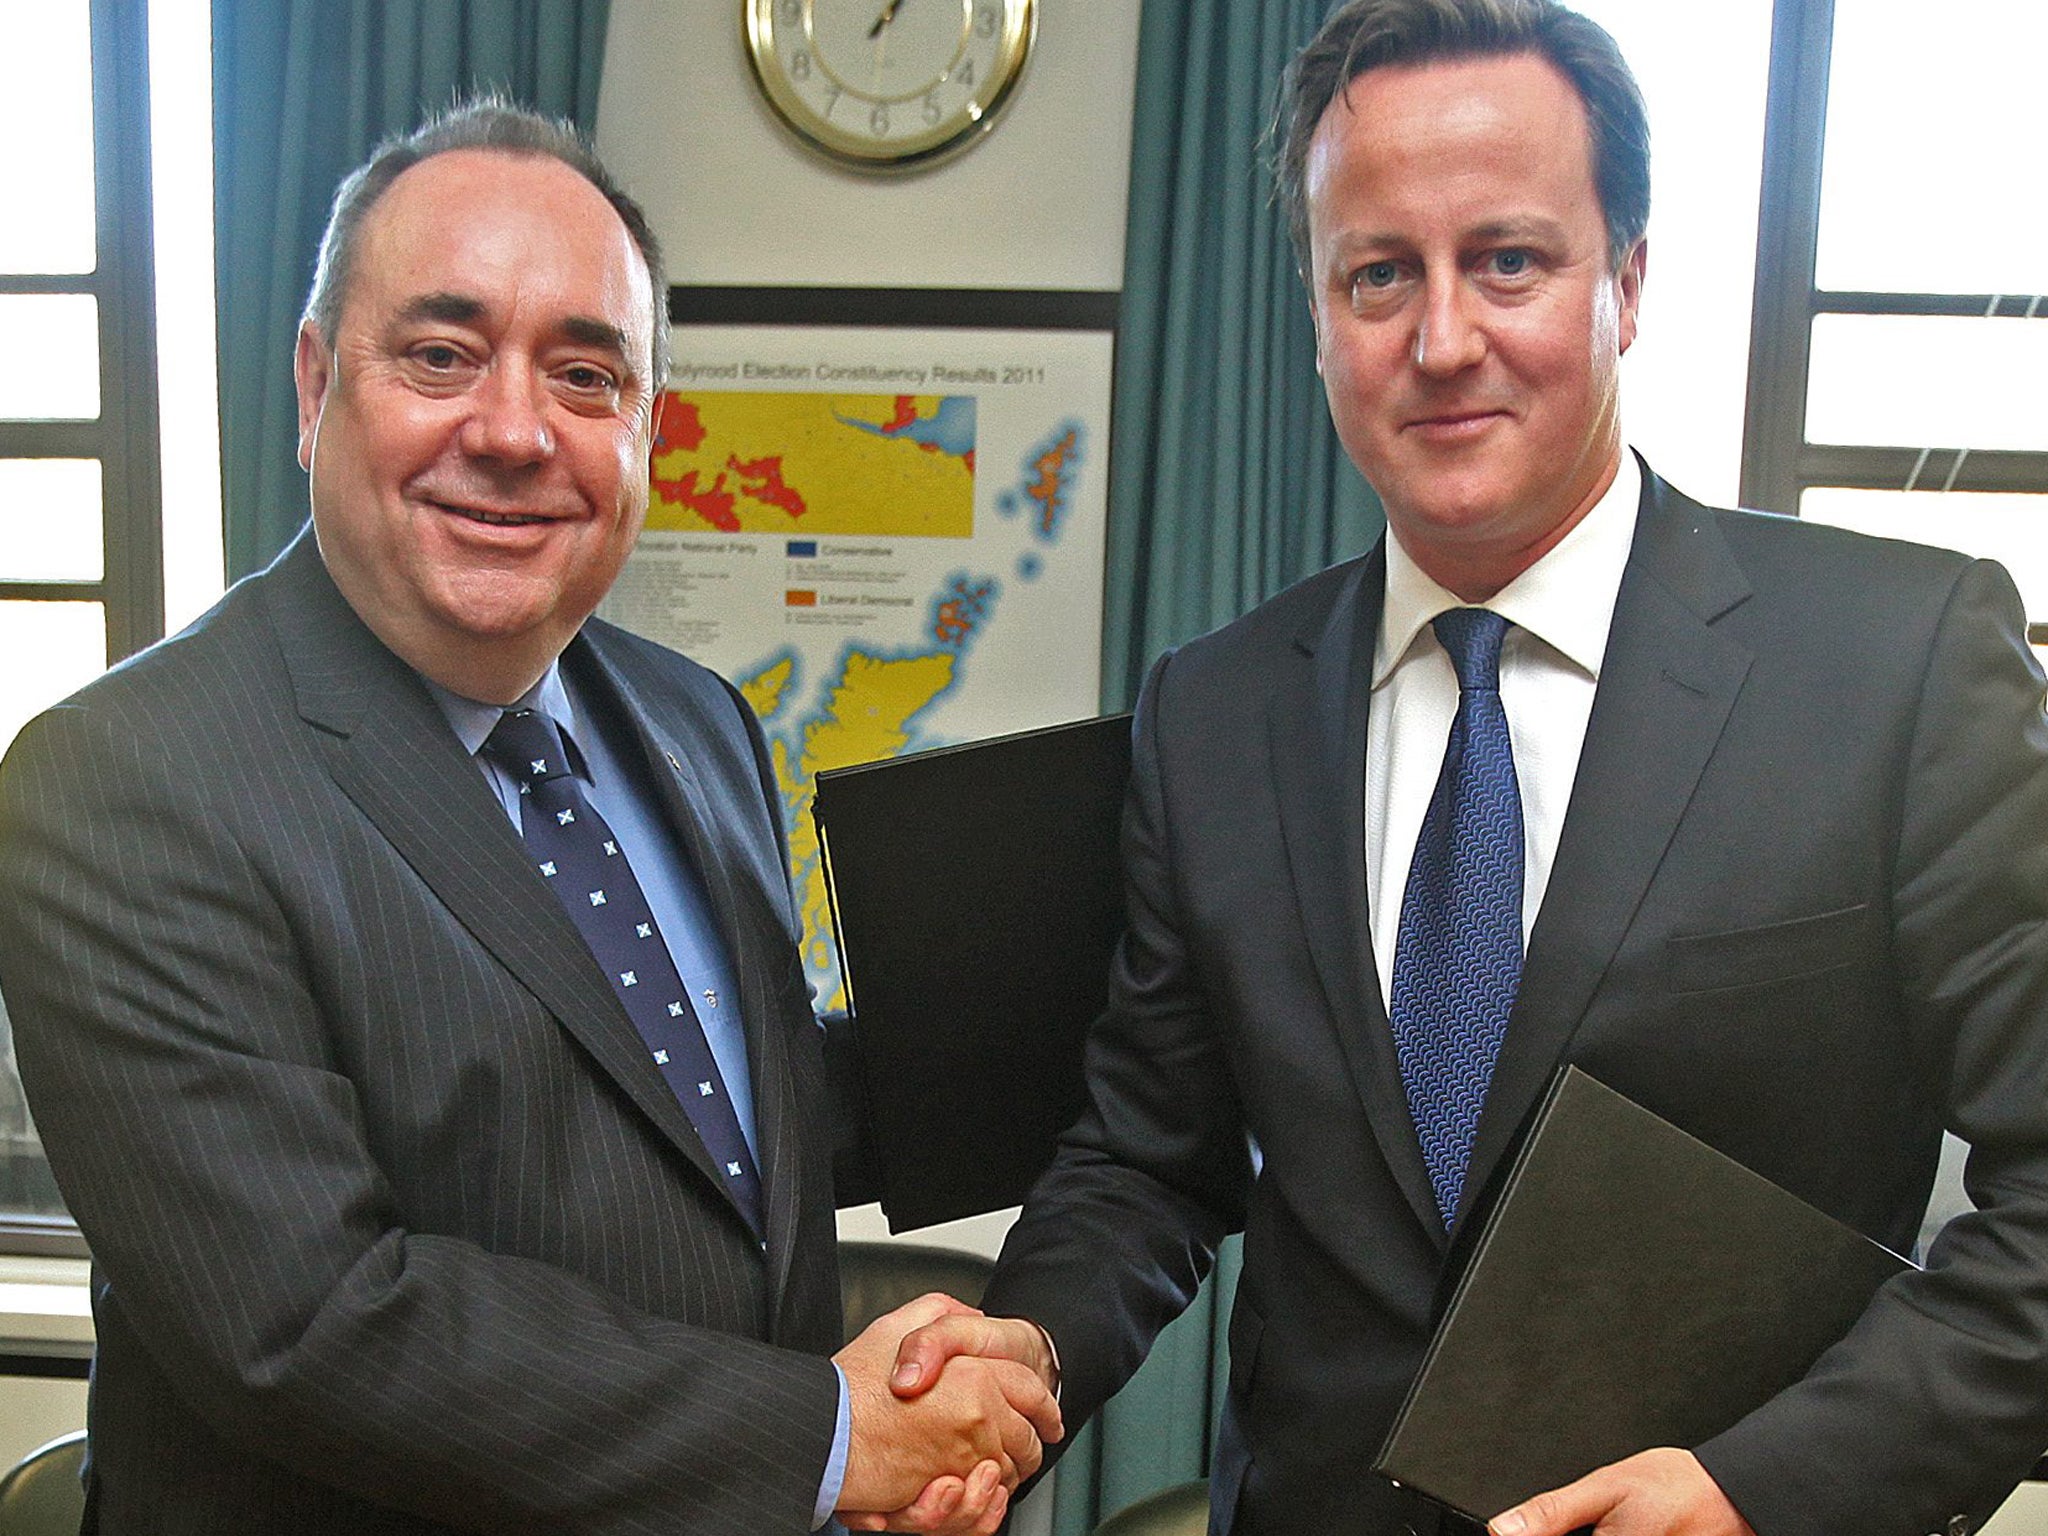 David Cameron and Alex Salmond signed the Edinburgh Agreement two years ago